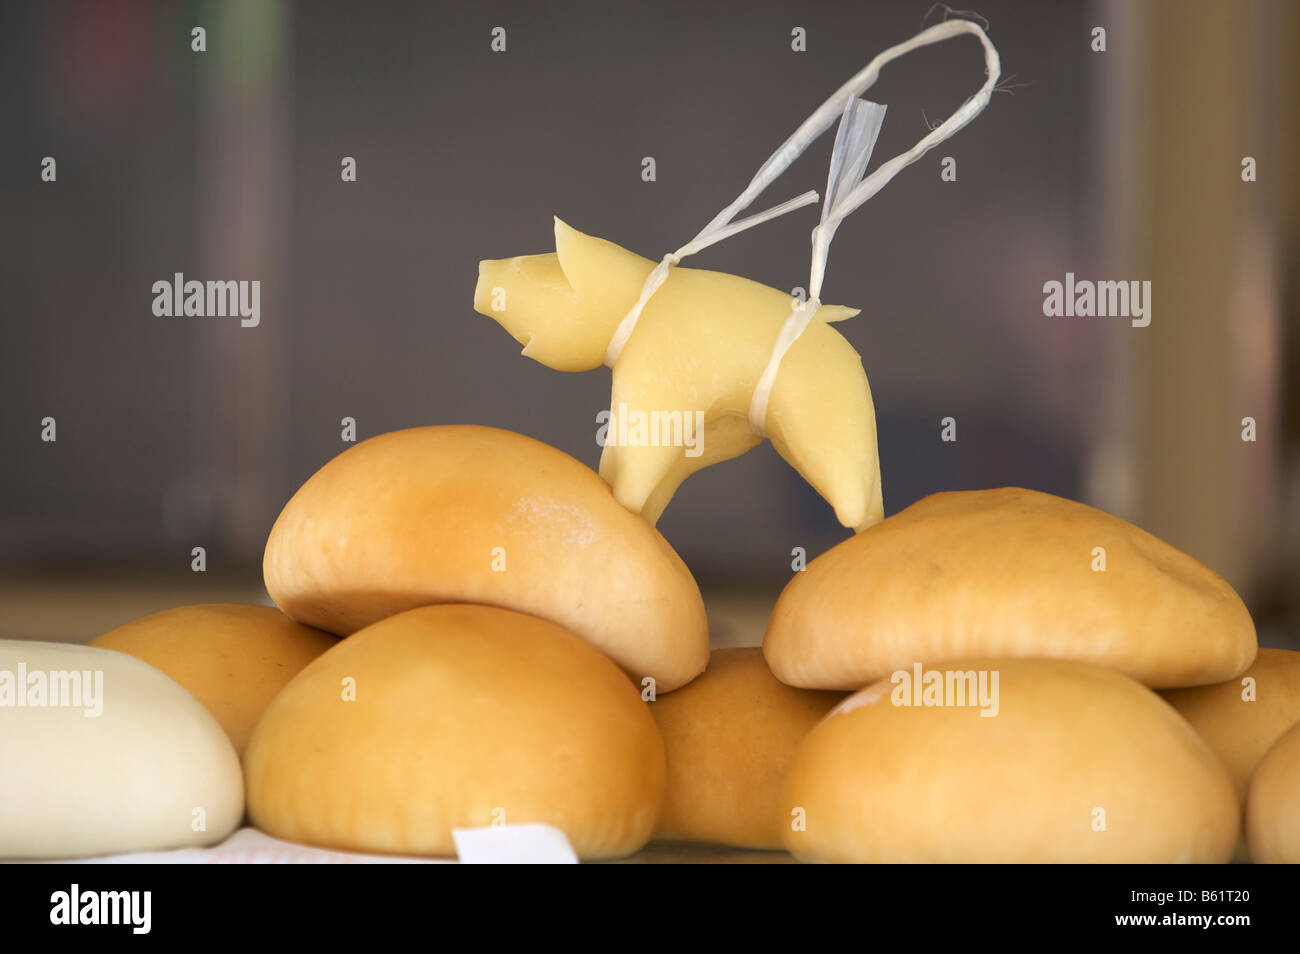 Scamorza kase hi-res stock images - Alamy and photography